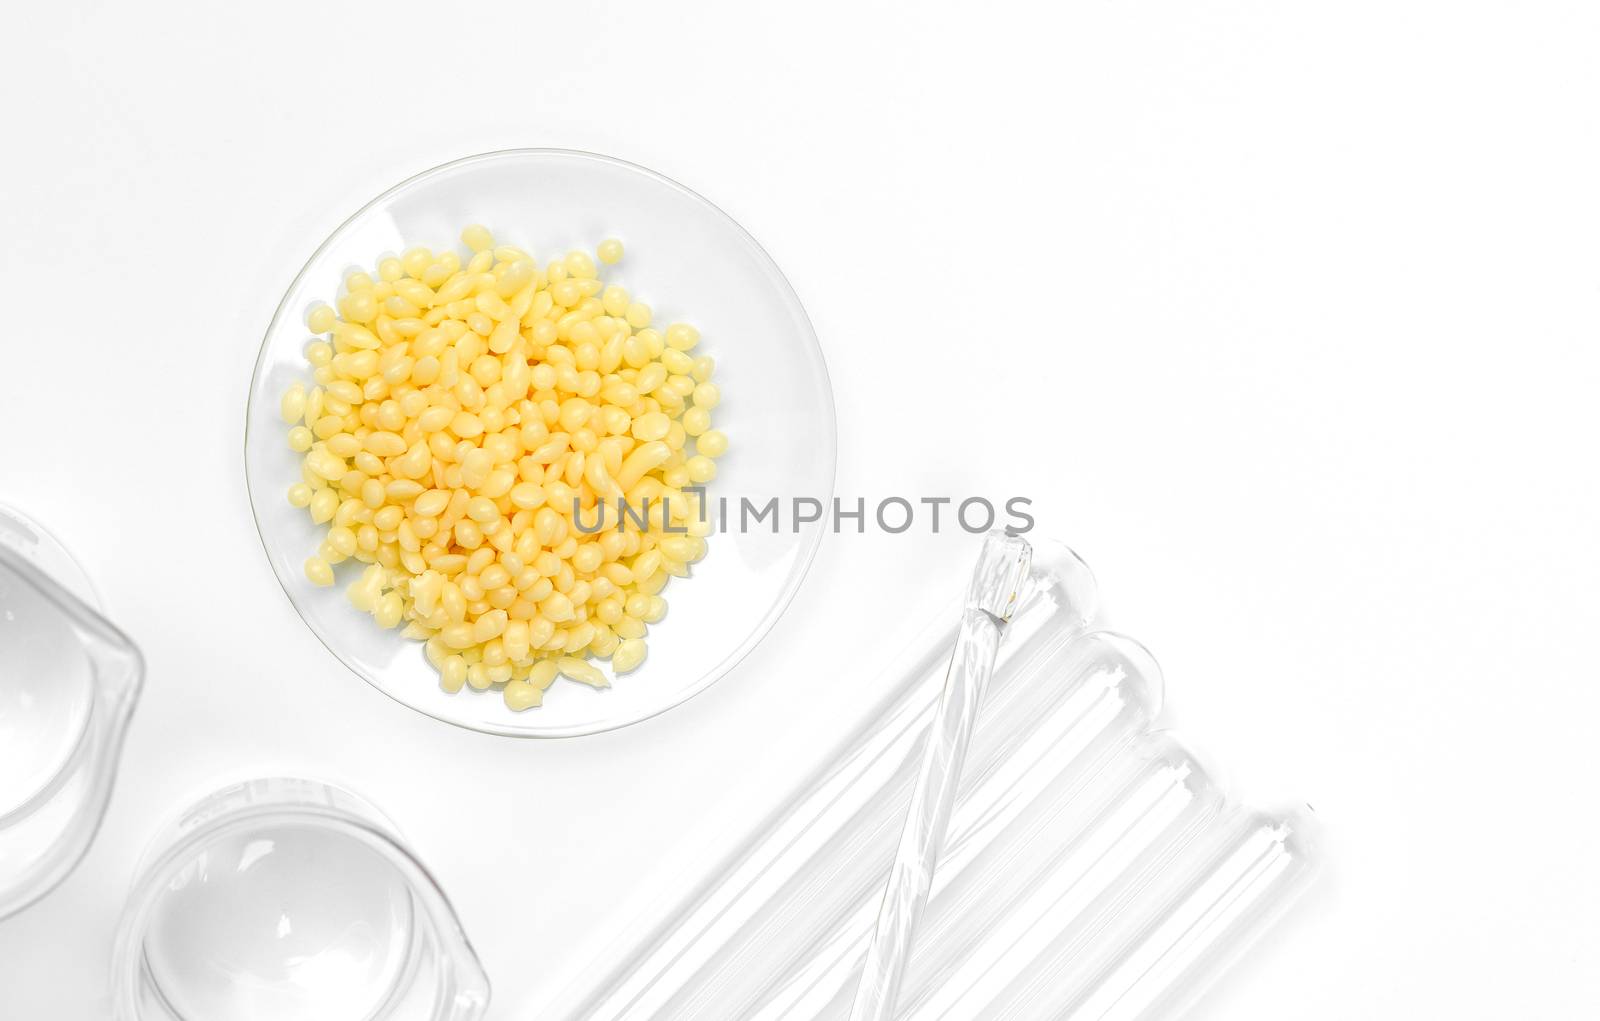 Candelilla Wax SP-75. Chemical ingredient for Cosmetics & Toiletries product by chadchai_k